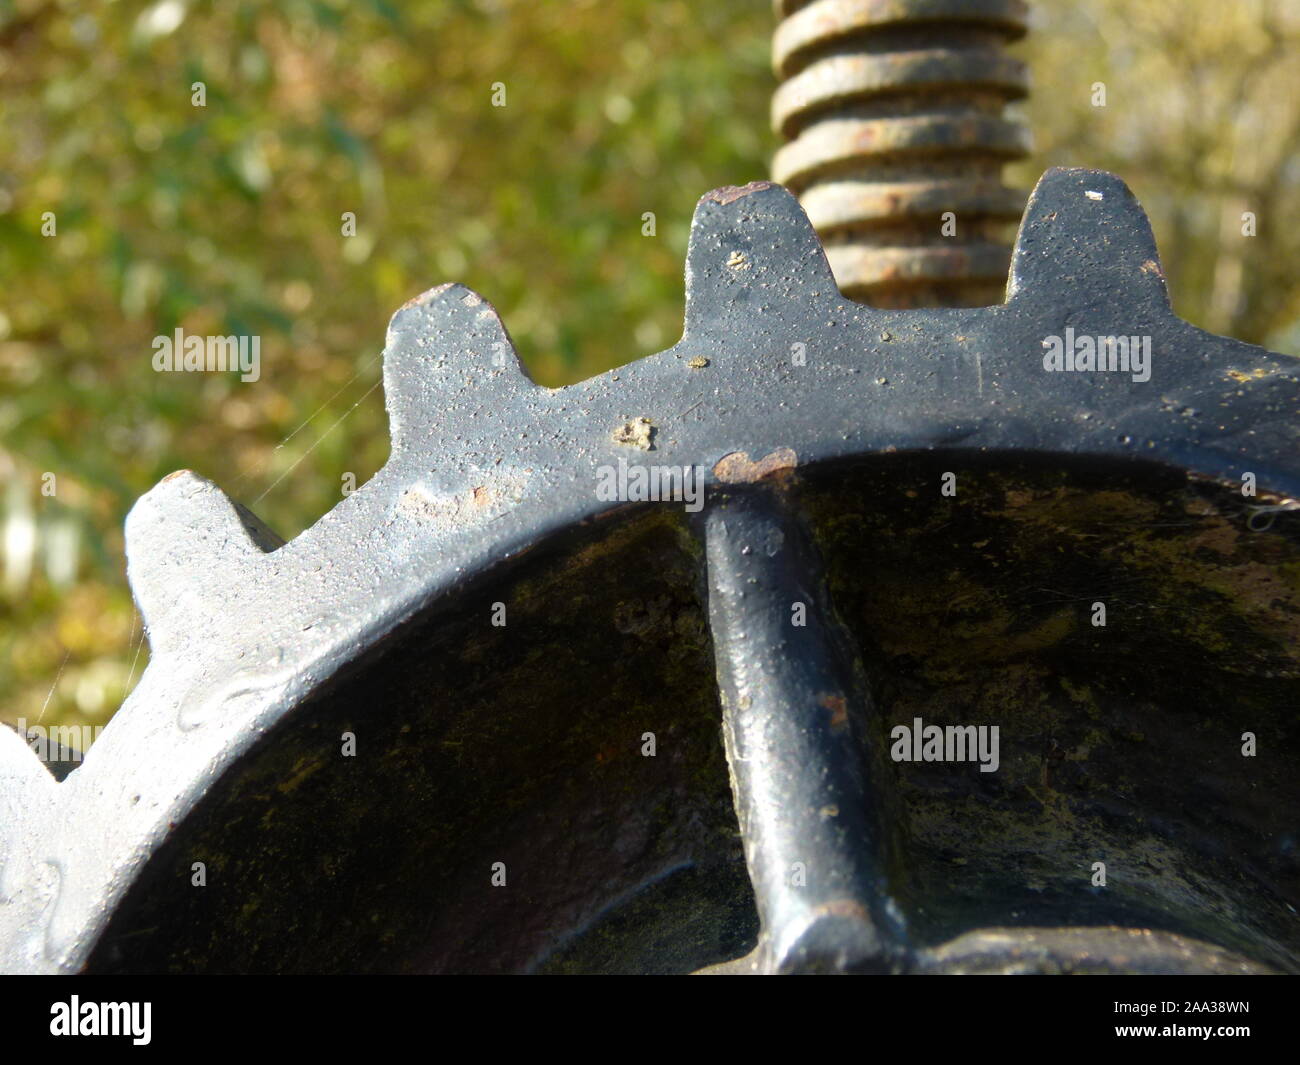 Close-up shot of old gear and spindle Stock Photo